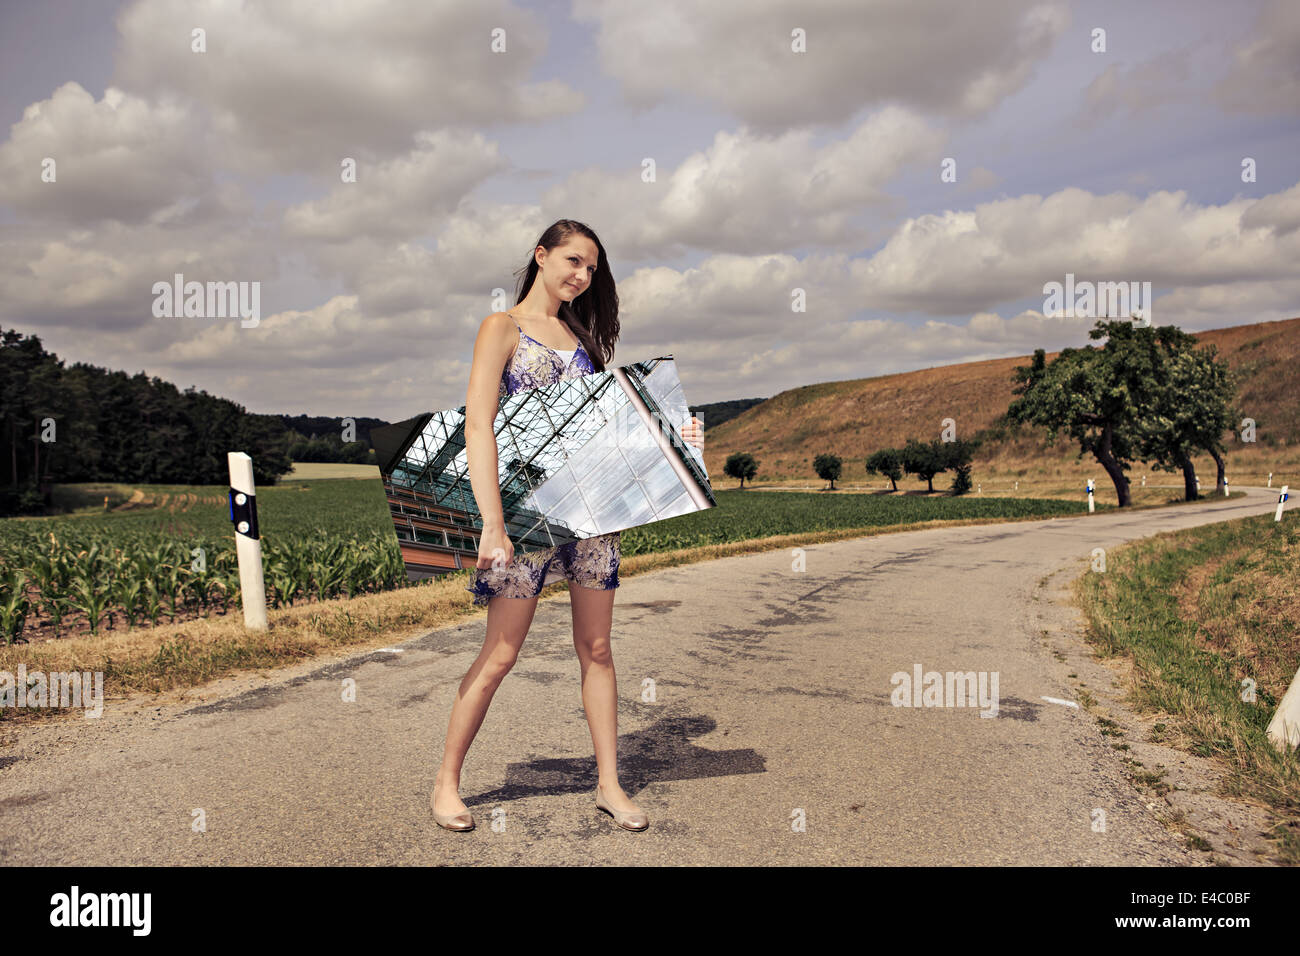 outdoor portrait of a young girl with a mirror in front of rural landscape Stock Photo